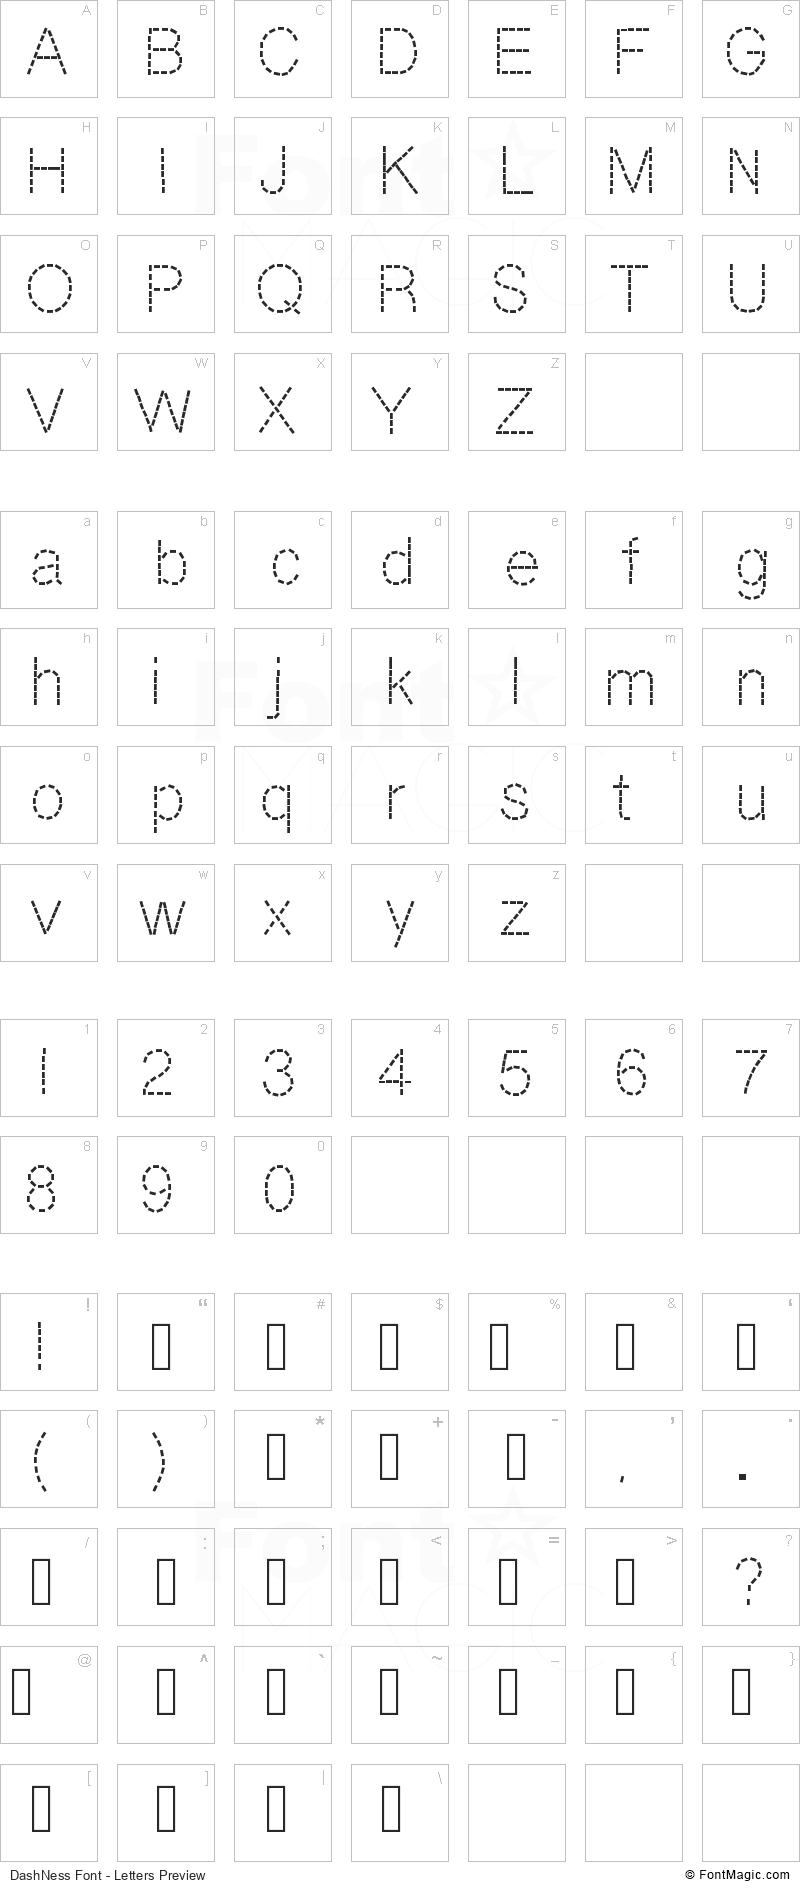 DashNess Font - All Latters Preview Chart